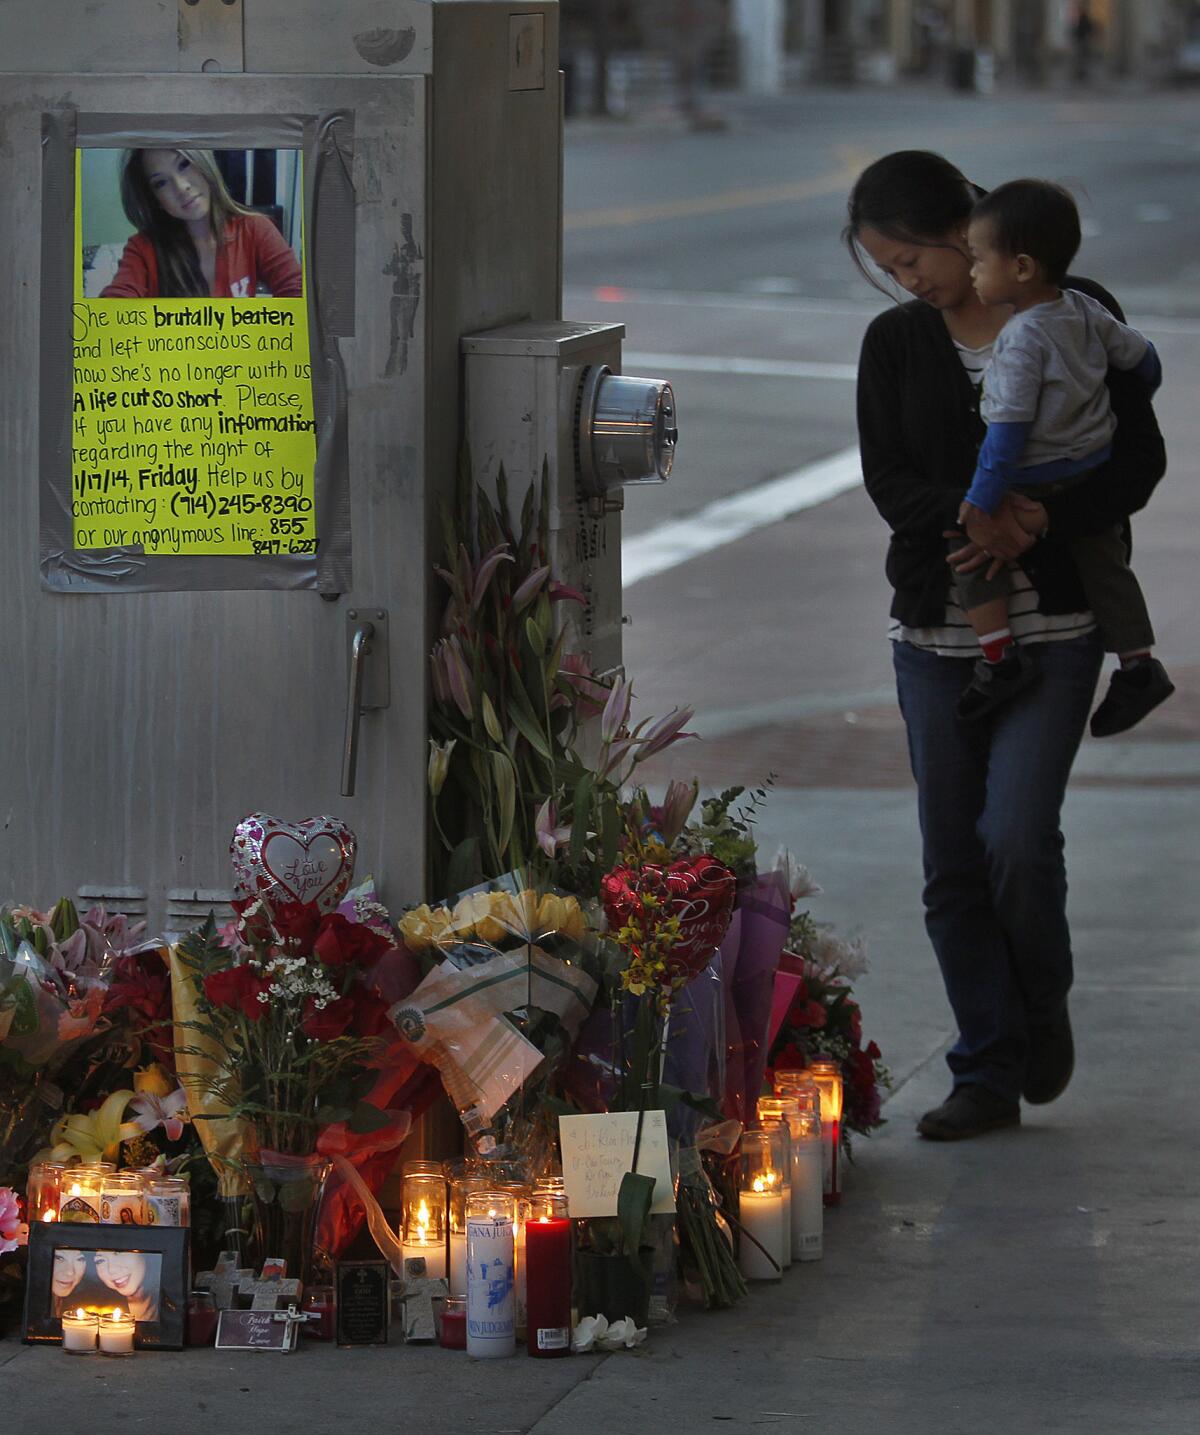 Fountain Valley resident Nga Doan, right, and her 21-month-old son, Frederik Doan, look at flowers and candles left outside the Crosby nightclub in Santa Ana. Doan's niece, Kim Pham, 23, was beaten unconscious at the site over the weekend.